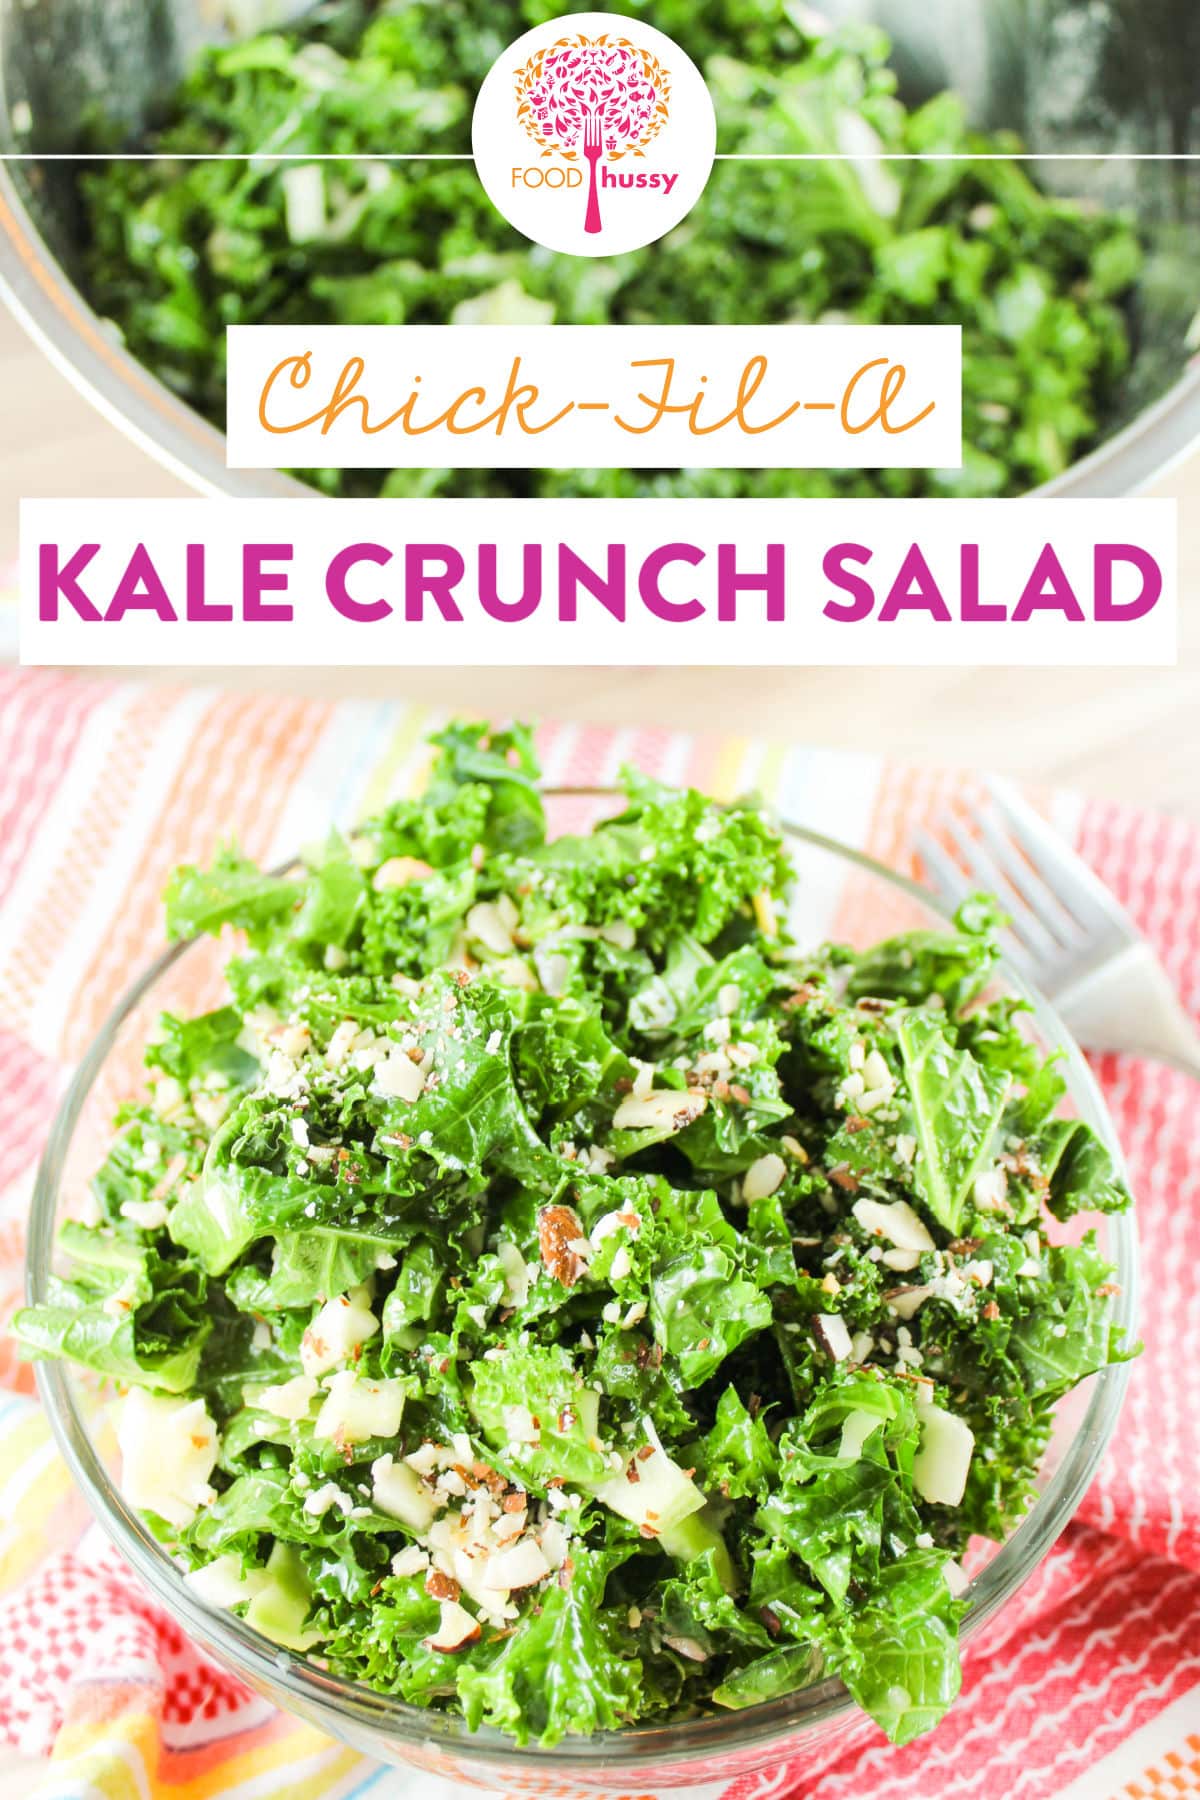 This copycat recipe for the Chick-fil-A Kale Crunch Salad is spot on with all of the flavors! Full of kale & cabbage in an apple dijon vinaigrette and topped with toasted almonds - it's a great side dish for any meal! via @foodhussy